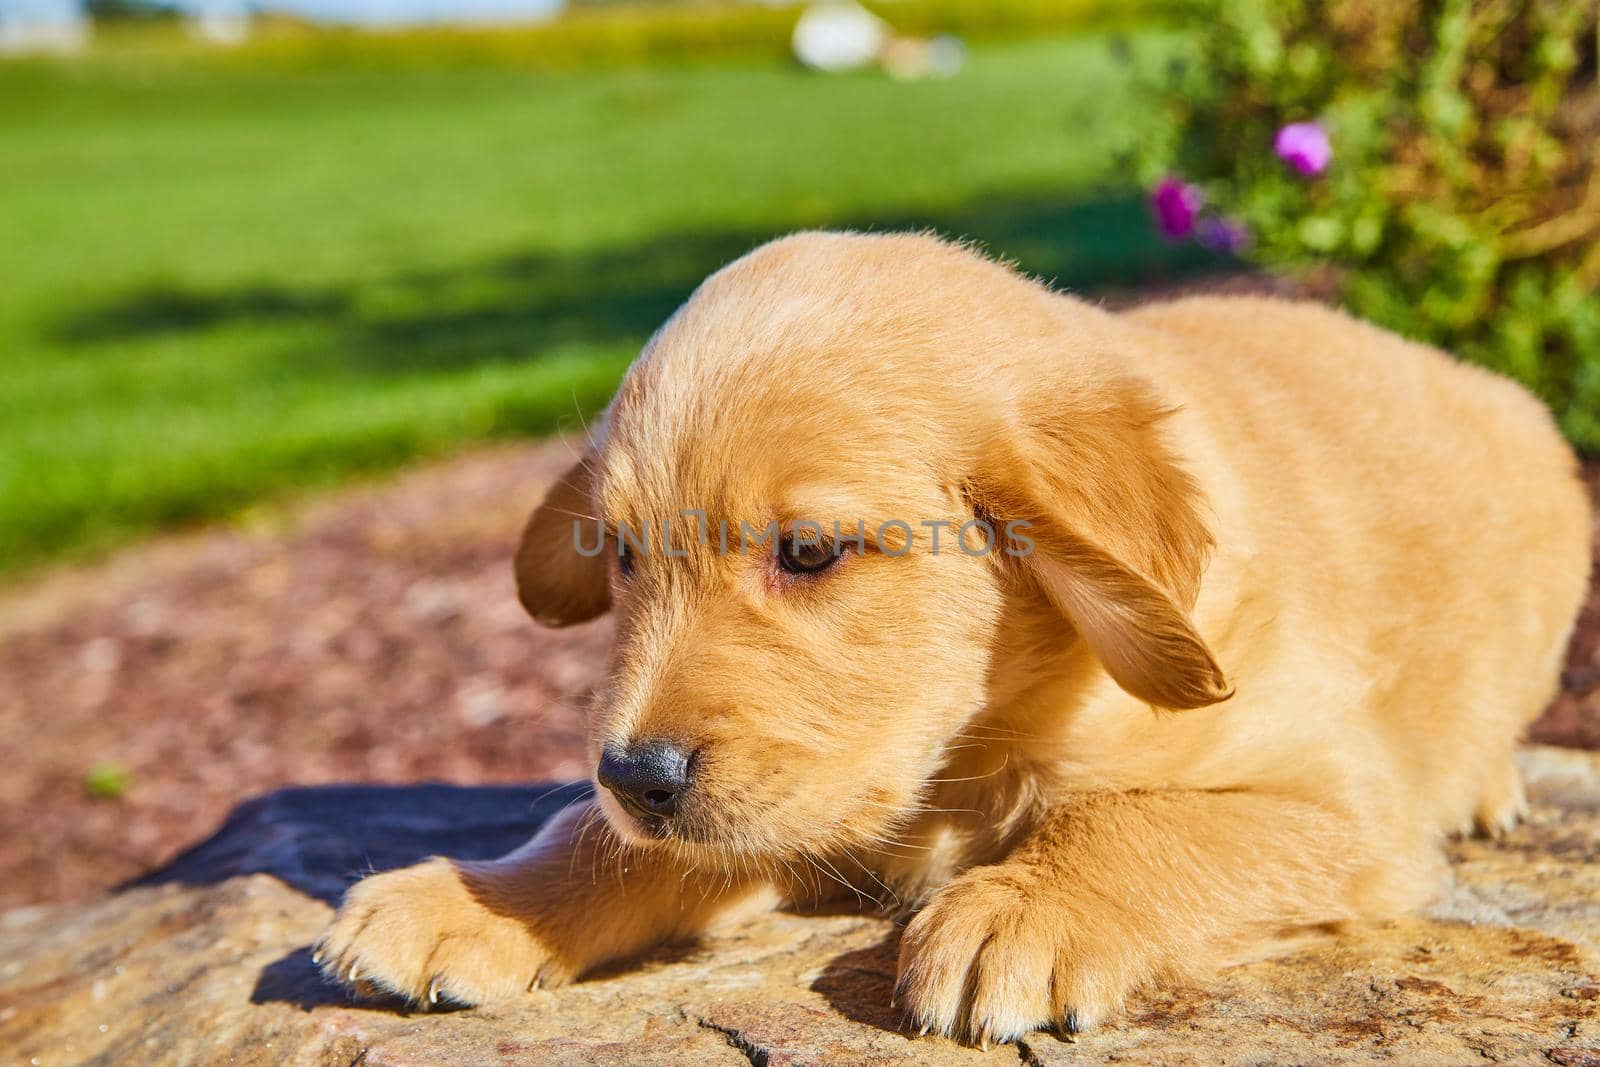 Image of Adorable golden retriever puppy resting on rock with field of grass in background